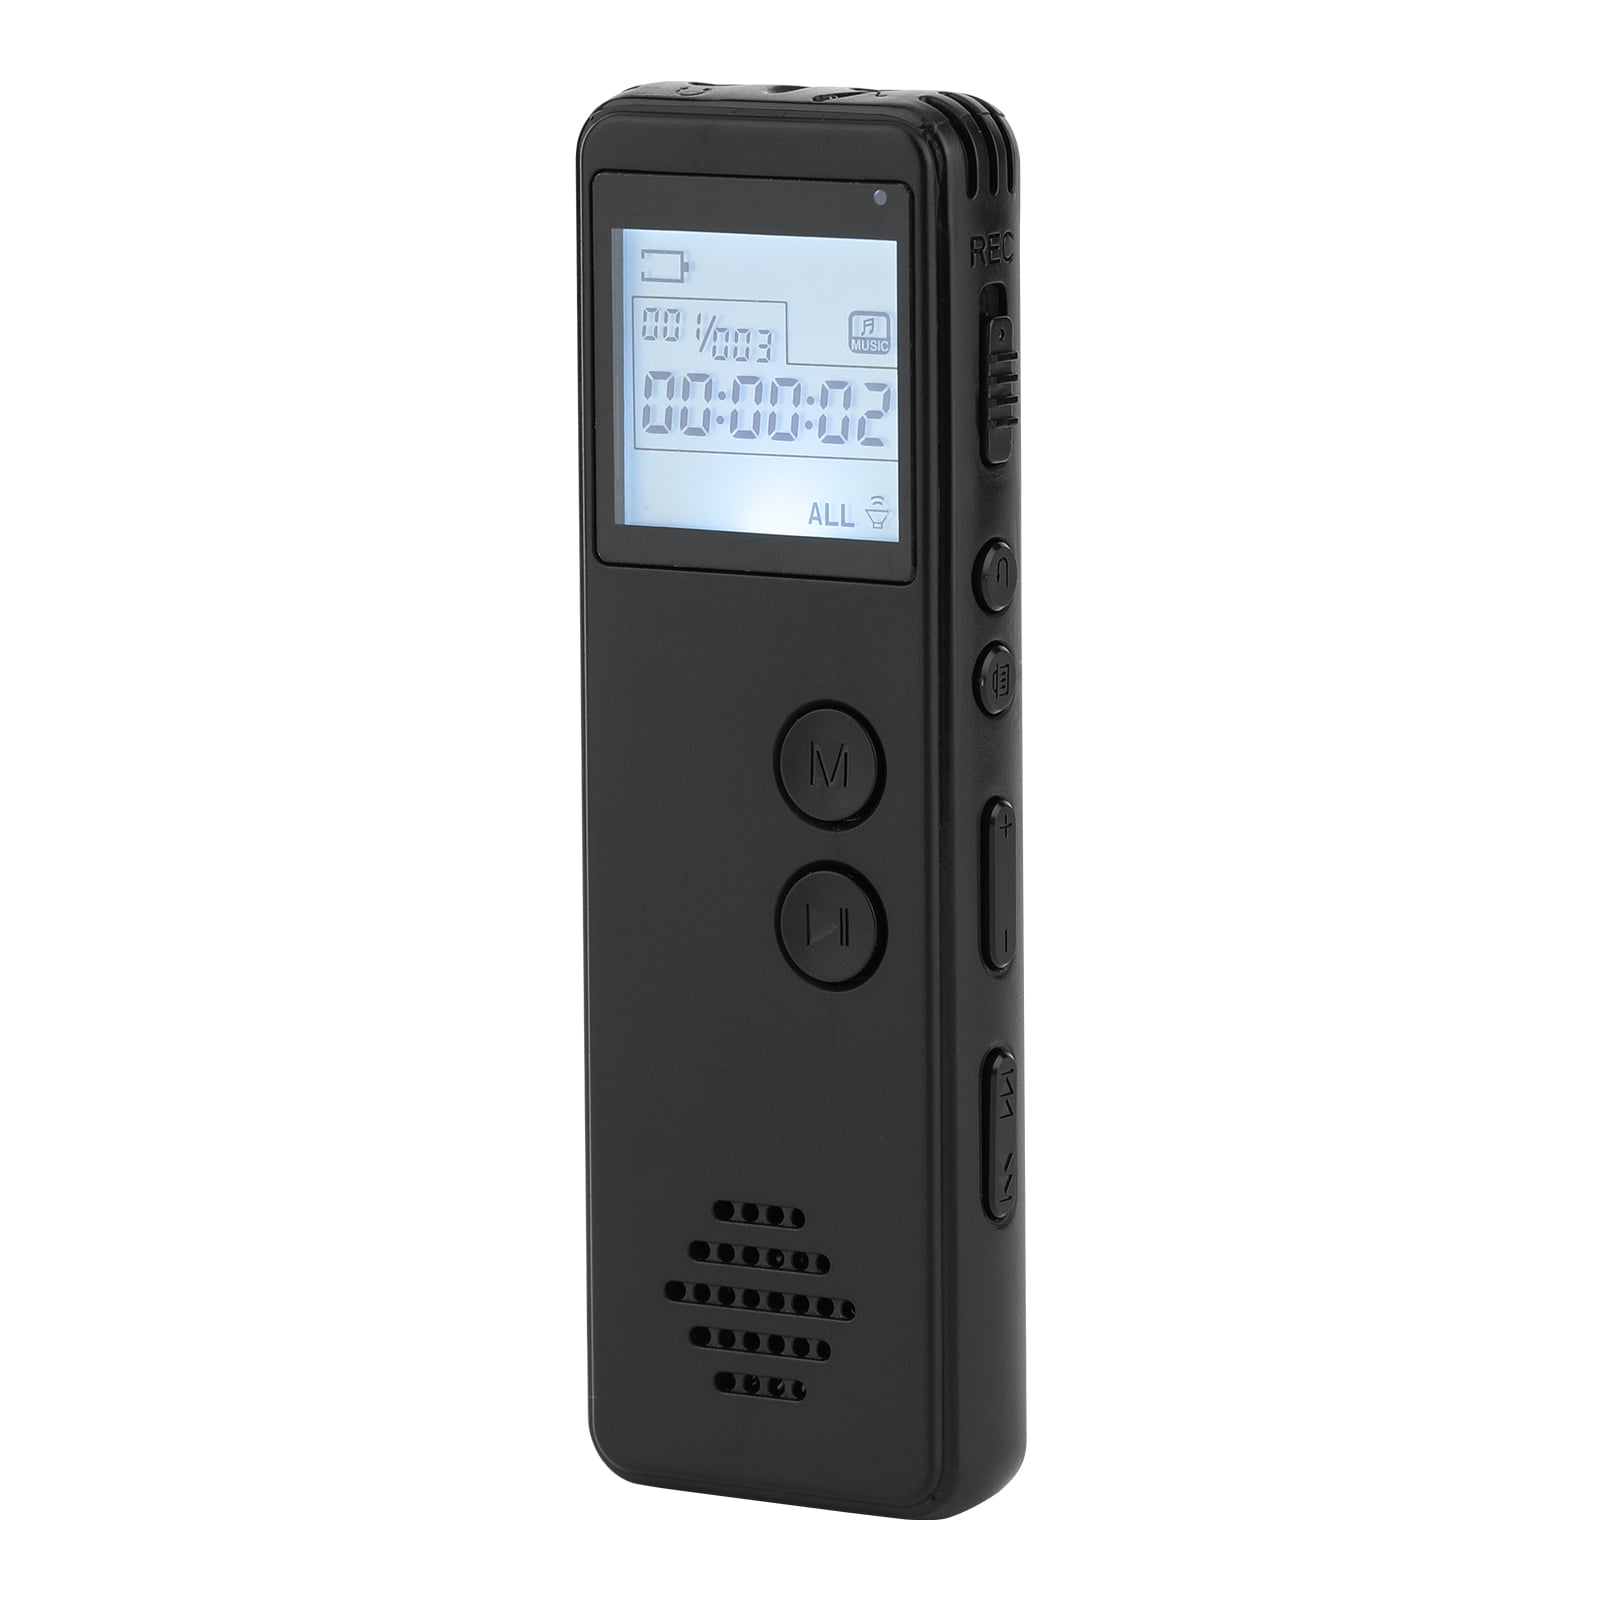 for Meetings College Interviews with MP3/USB/Wiriting/Metal Body QZTELECTRONIC Digital Voice Activated Recorder for Lectures Voice Recorder 16GB-Black